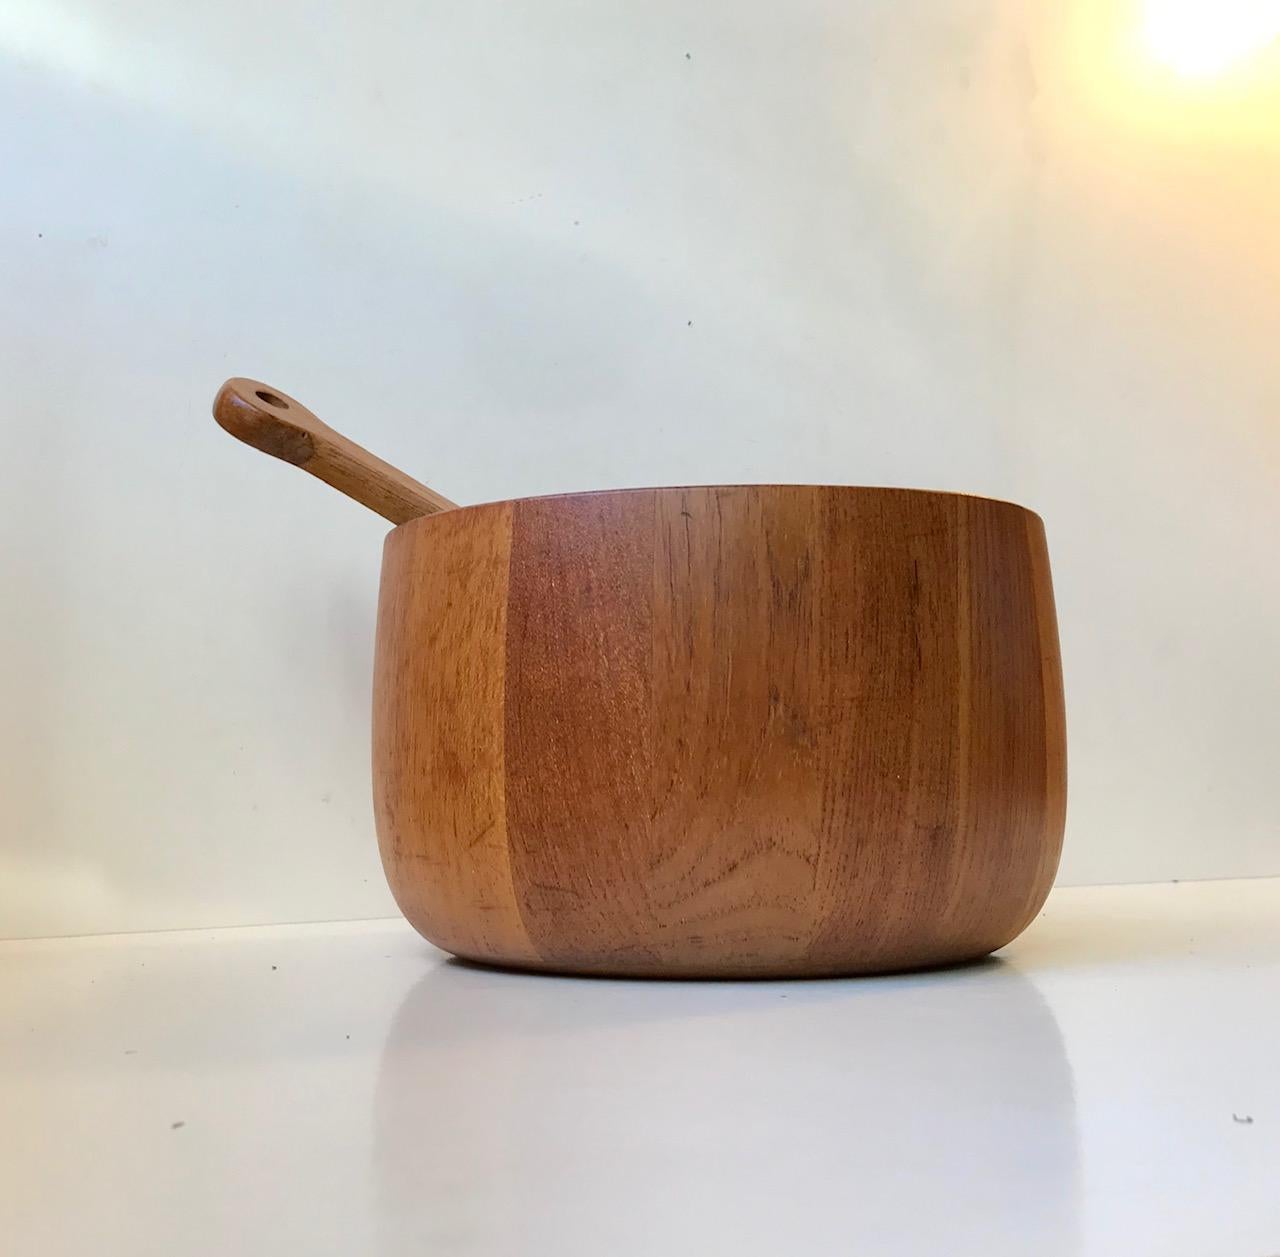 Large hand-turned stacked solid teak bowl by Richard Nissen, Denmark. It was designed and manufactured in the early 1960s. Nissen collaborated with Illums Bolighus in Copenhagen during this period. The bowl comes with a salad serving set also from